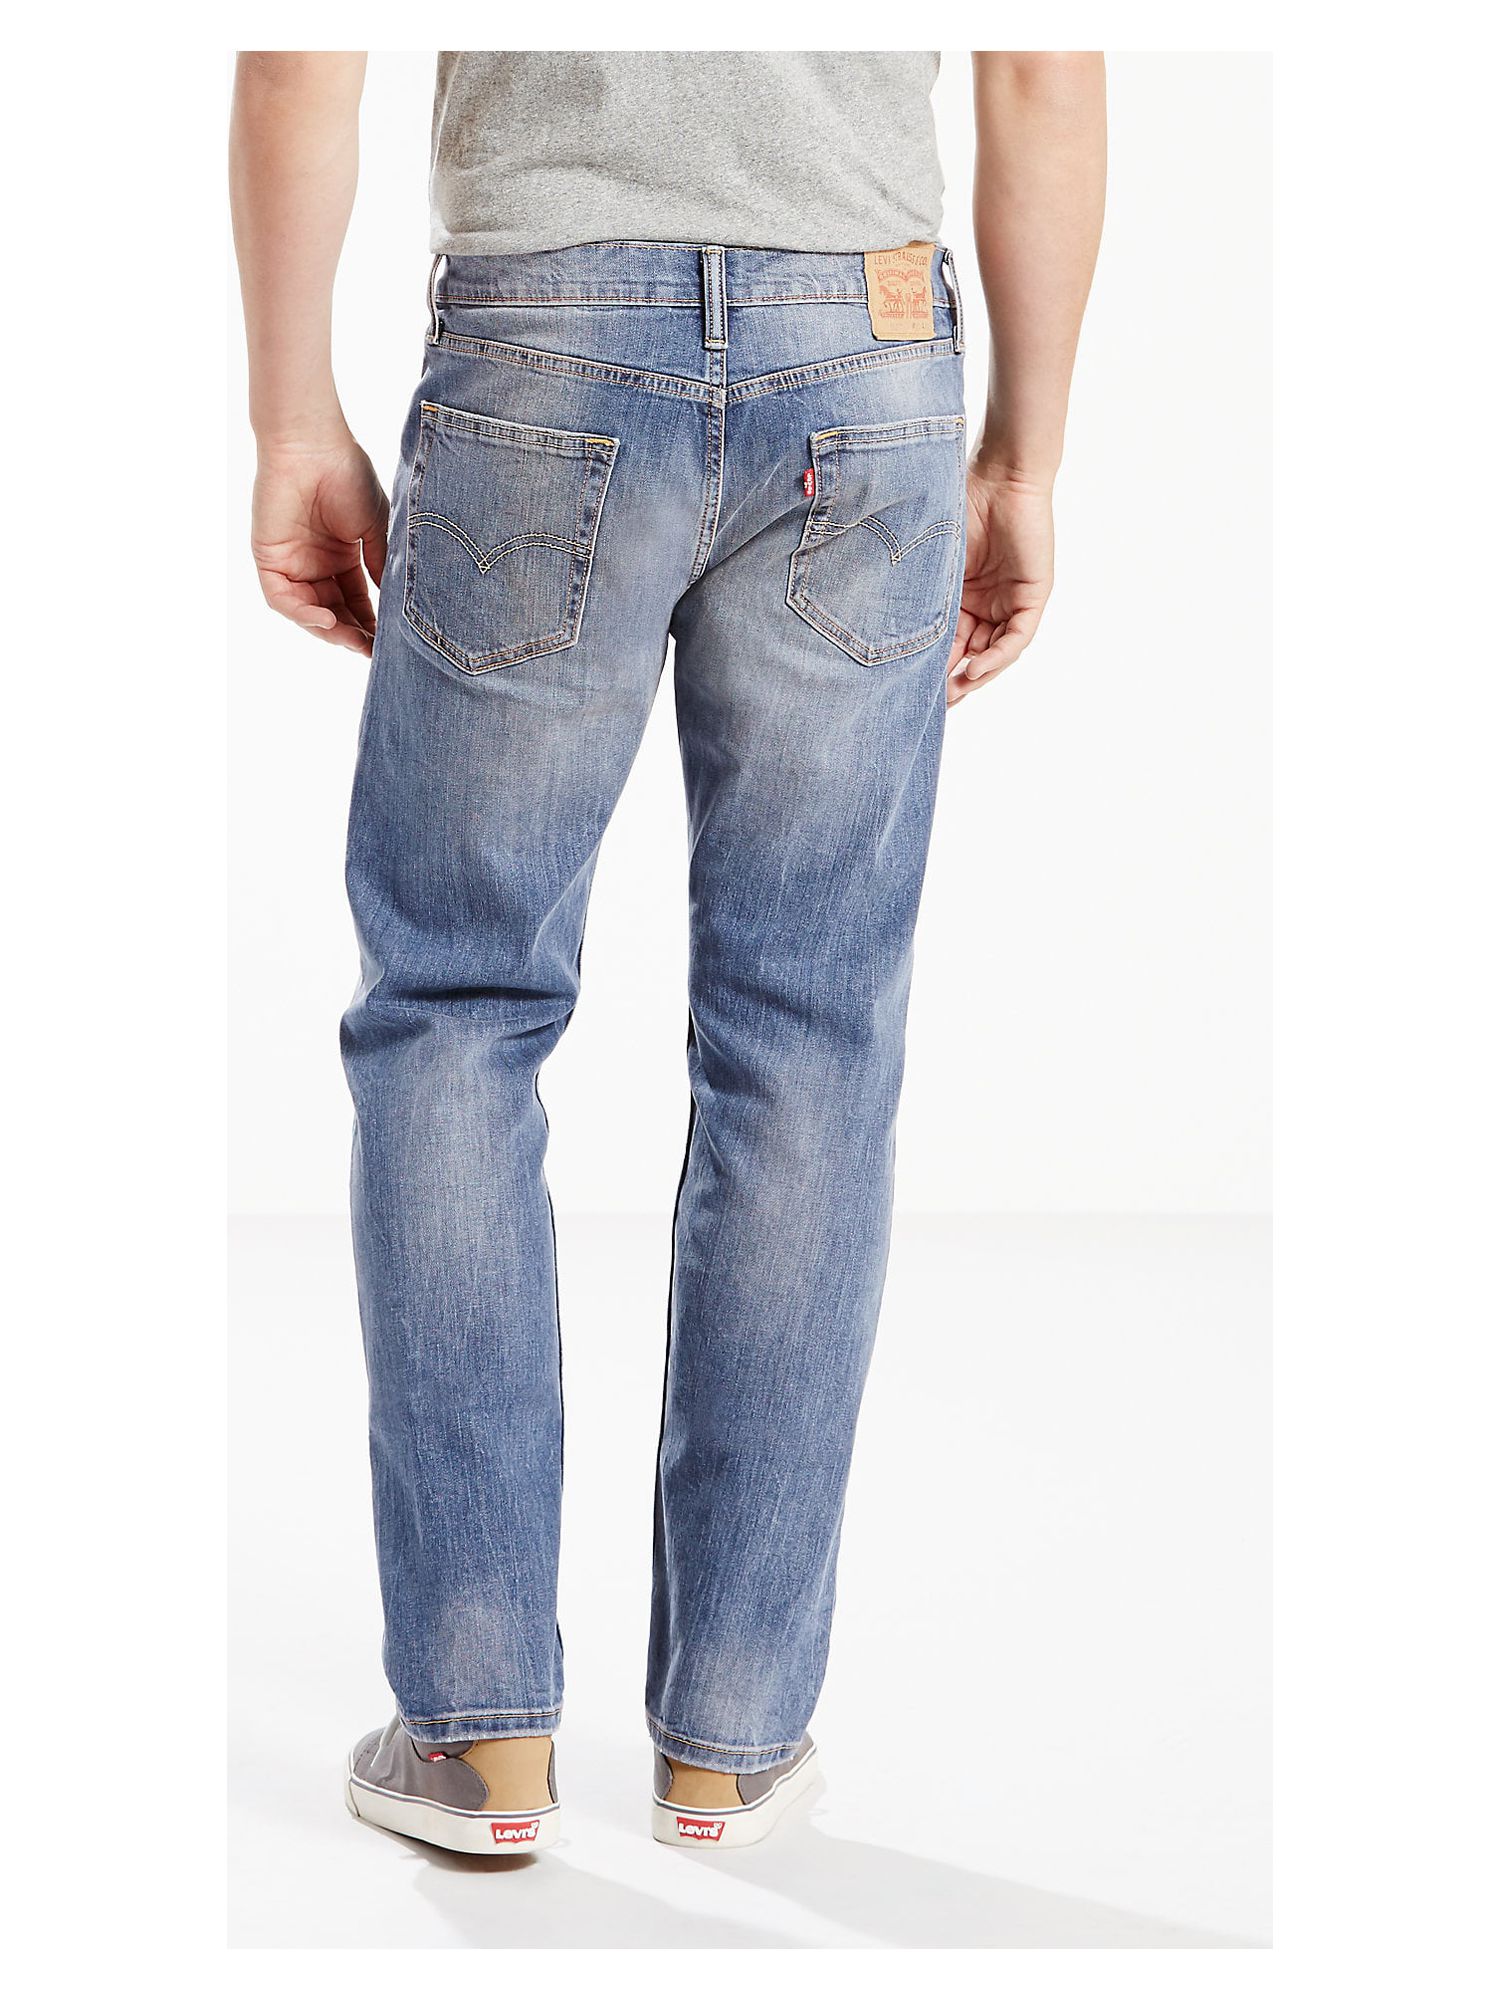 Levi's Mens 502 Regular Fit Stretch Tapered Jeans - image 5 of 7